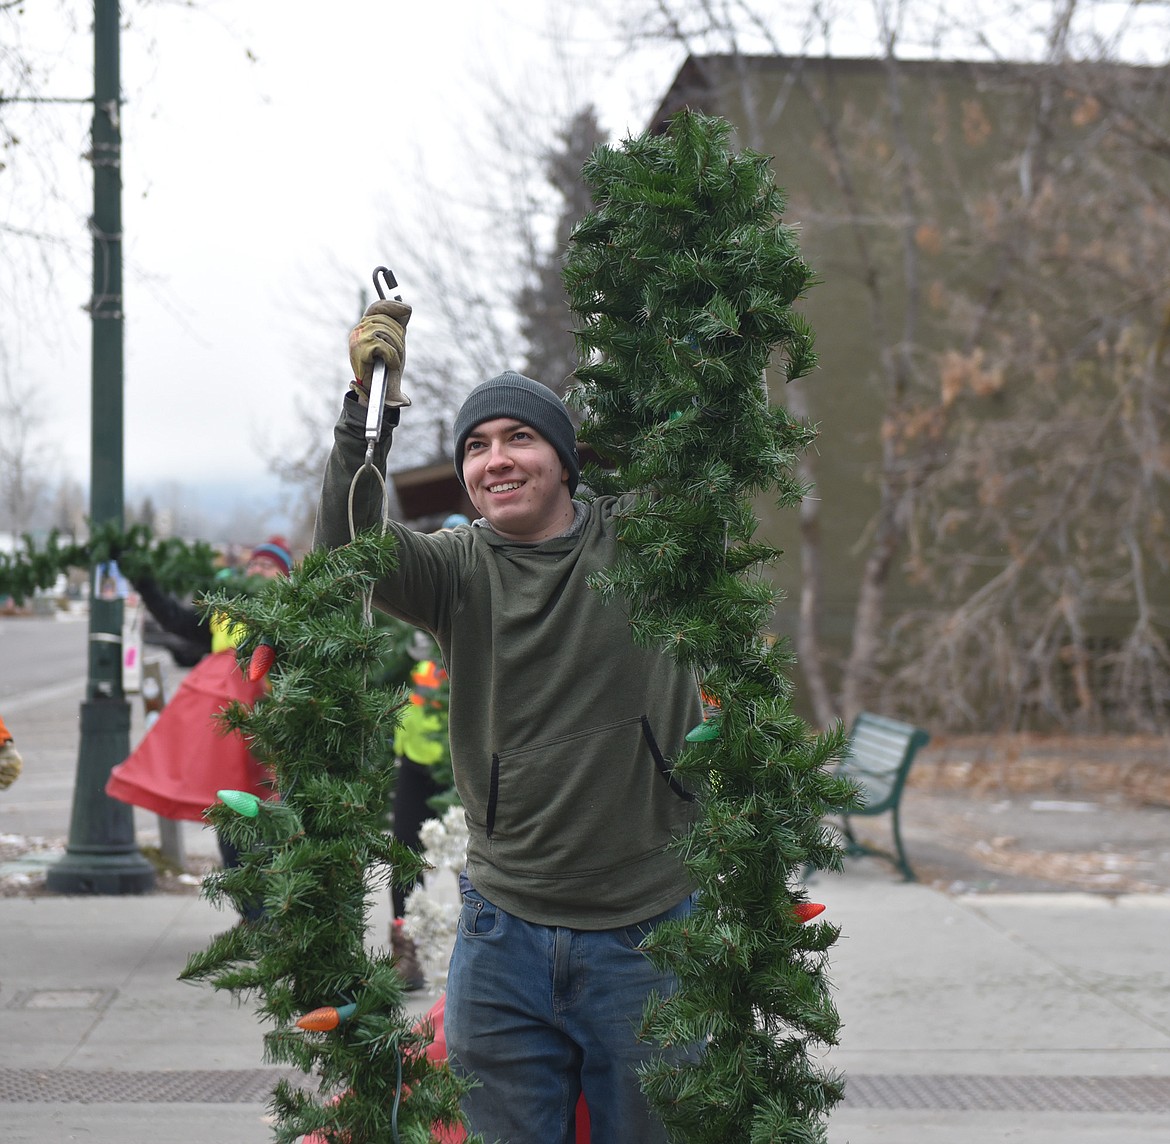 A volunteer helps with the garlands Sunday morning. (Julie Engler/Whitefish Pilot)